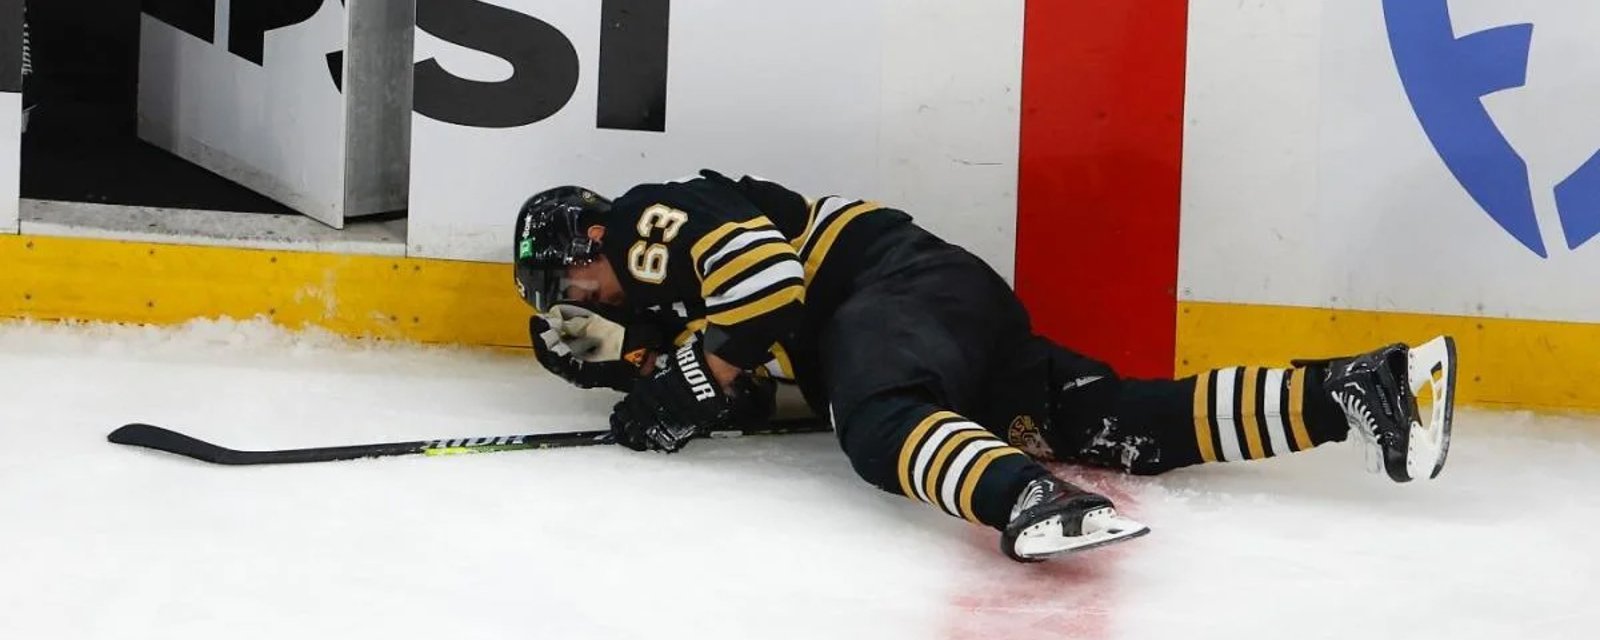 Concerning hint leaked that Brad Marchand’s injury is way worse than first reported